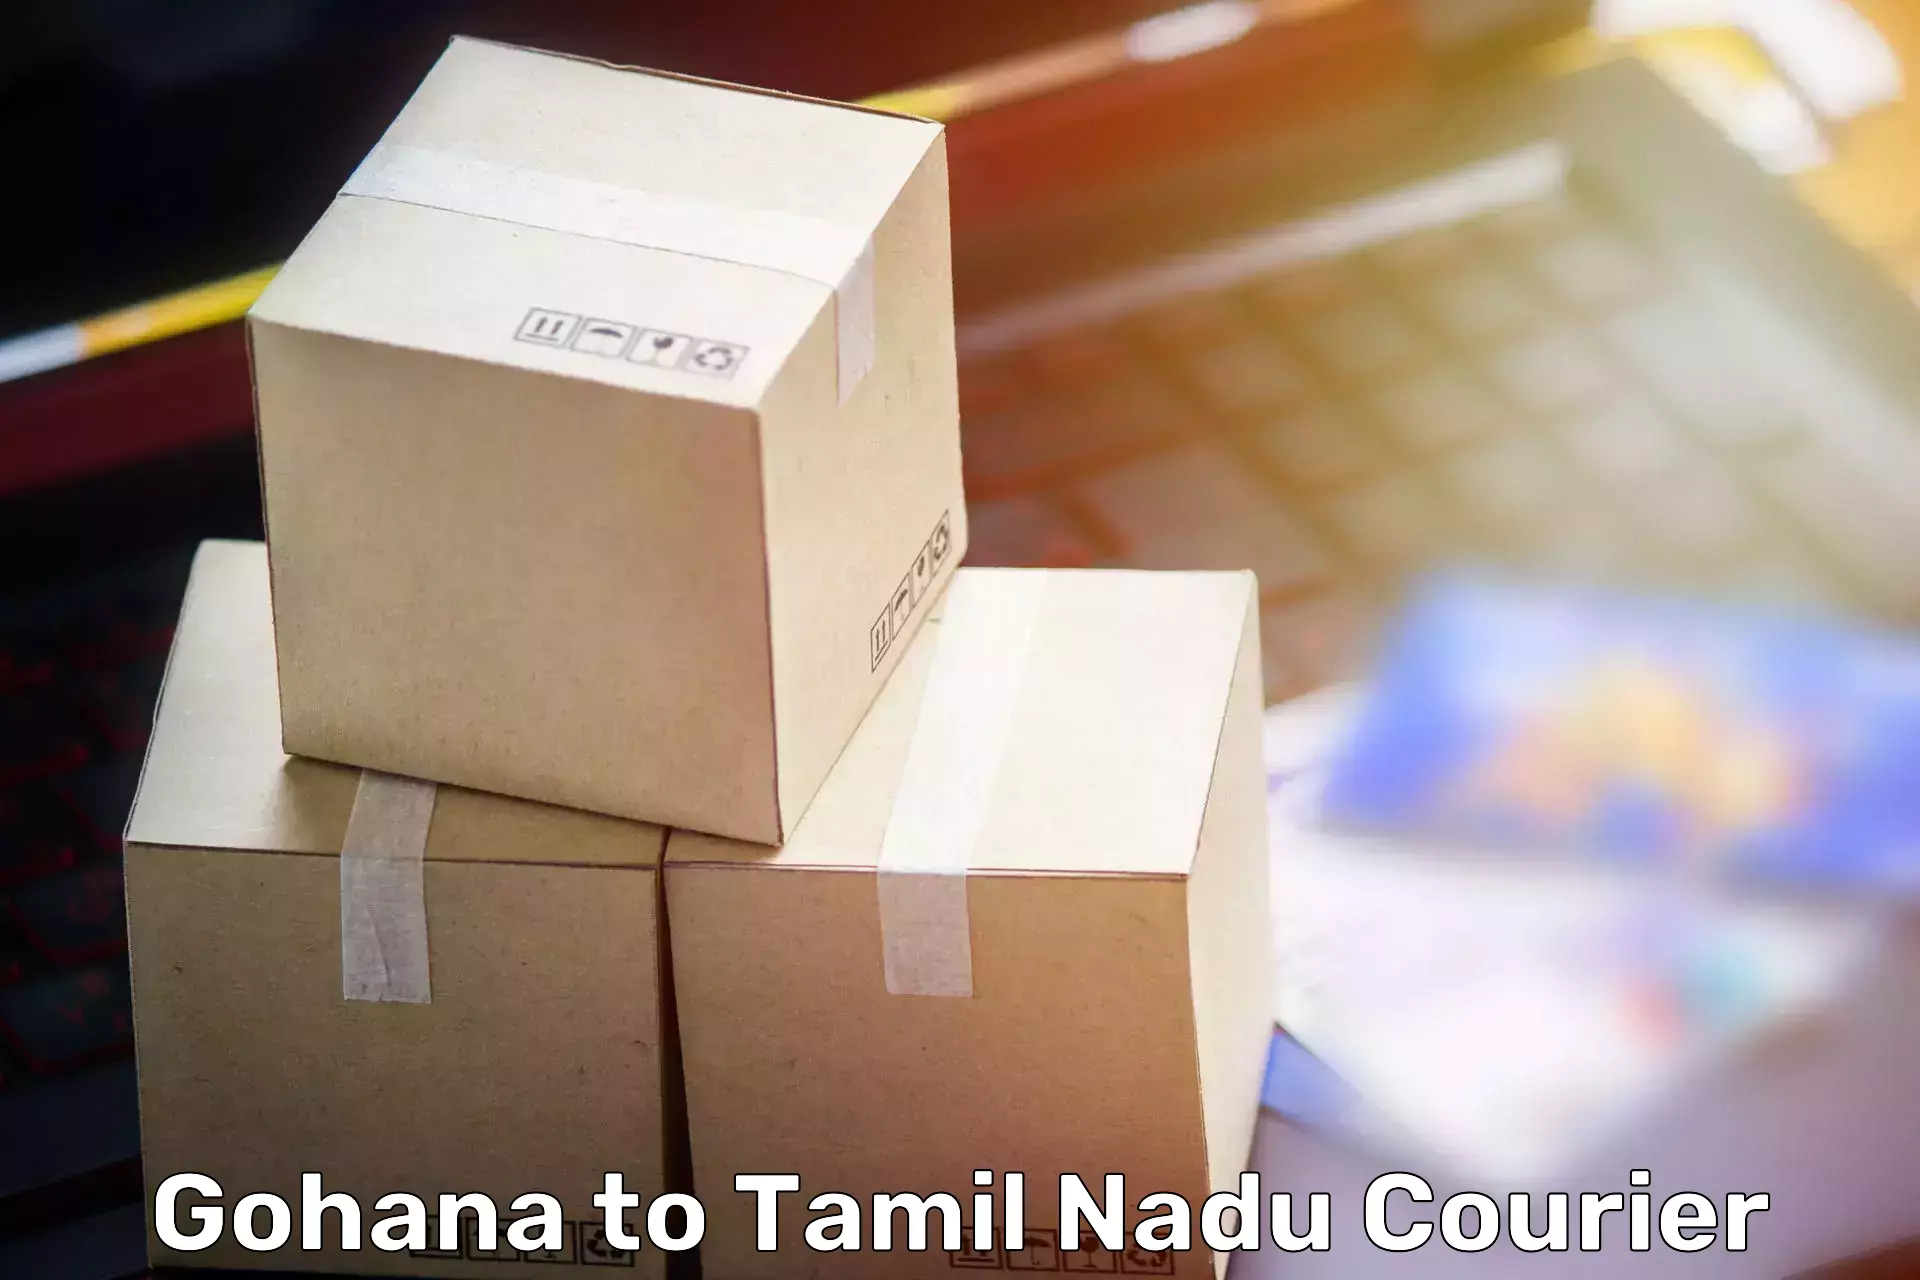 Furniture delivery service Gohana to Karunya Institute of Technology and Sciences Coimbatore